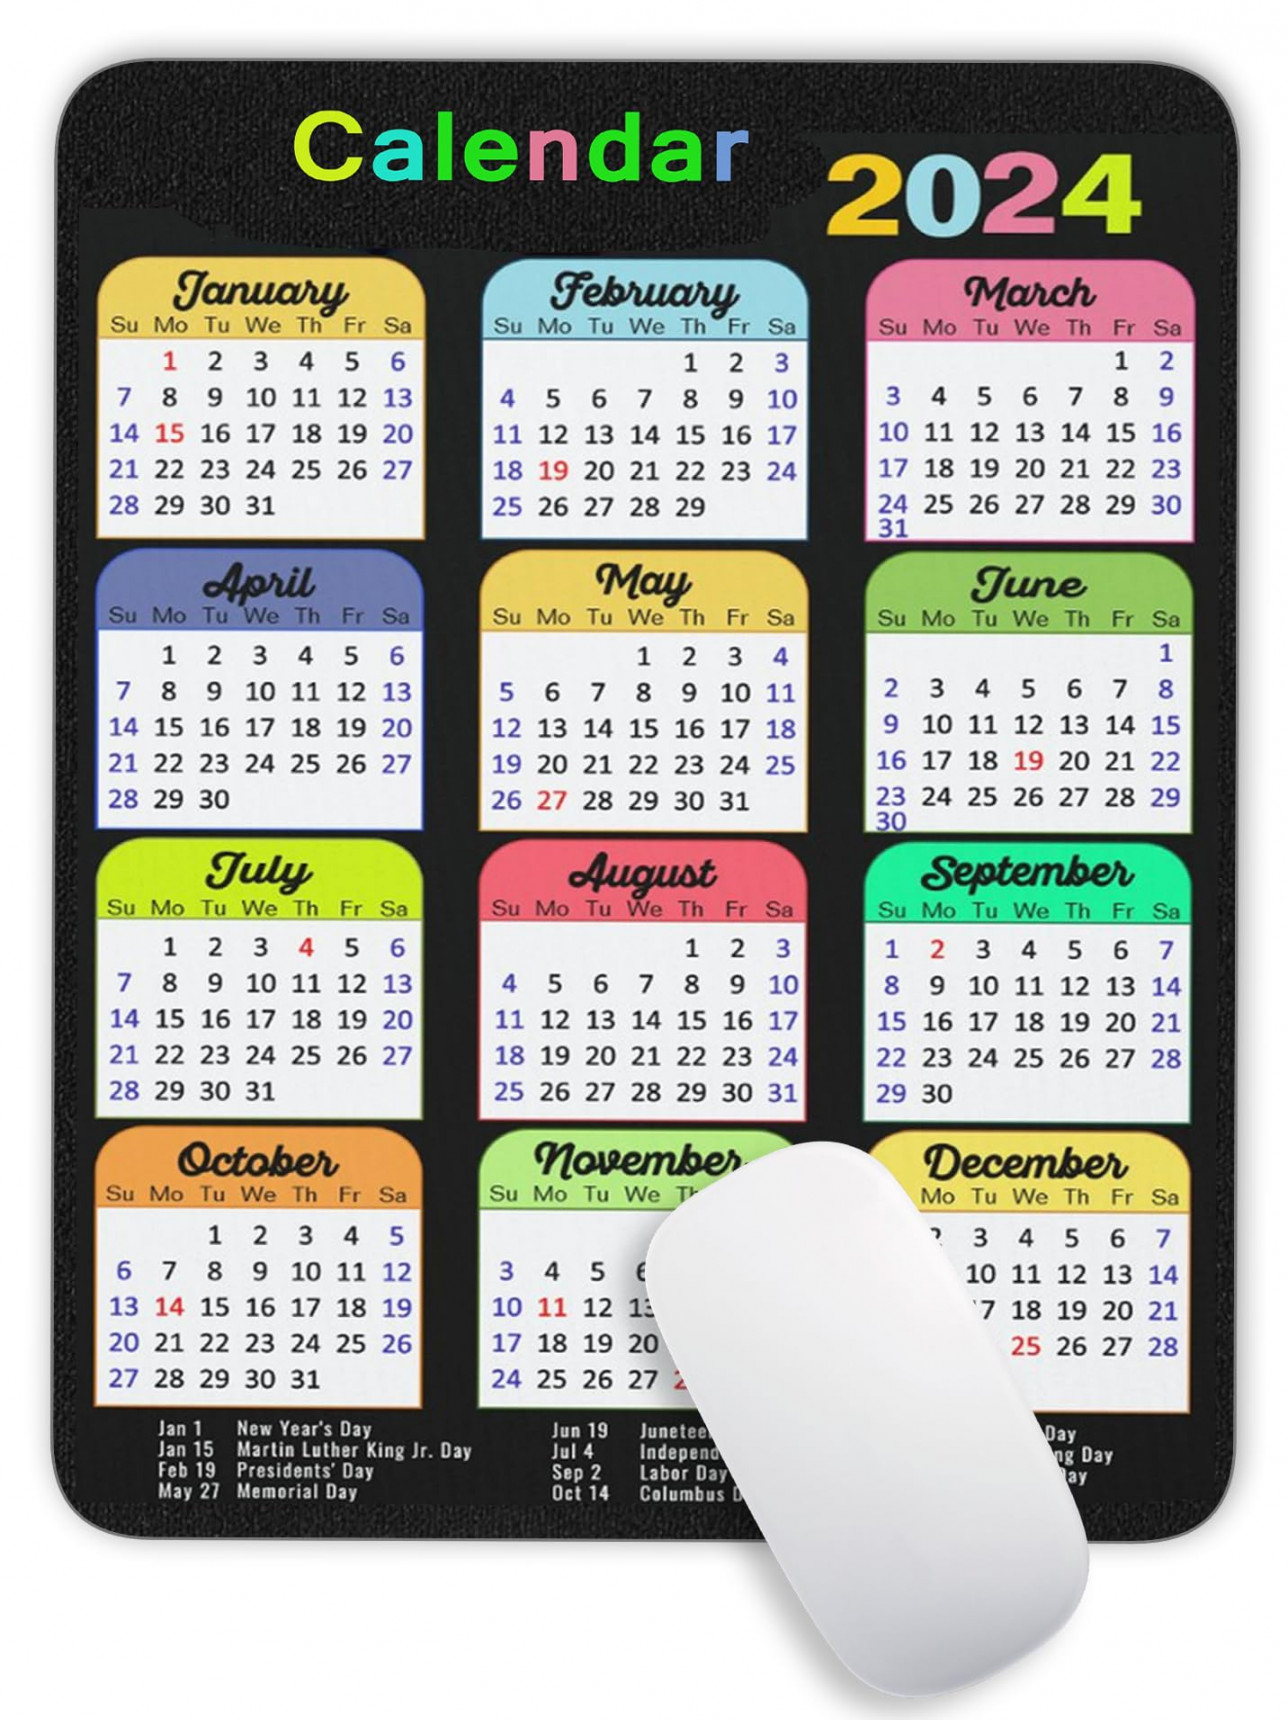 color calendar vertical mouse pad gaming calendar mouse mat with custom design square waterproof mouse pad non slip rubber base mousepads for